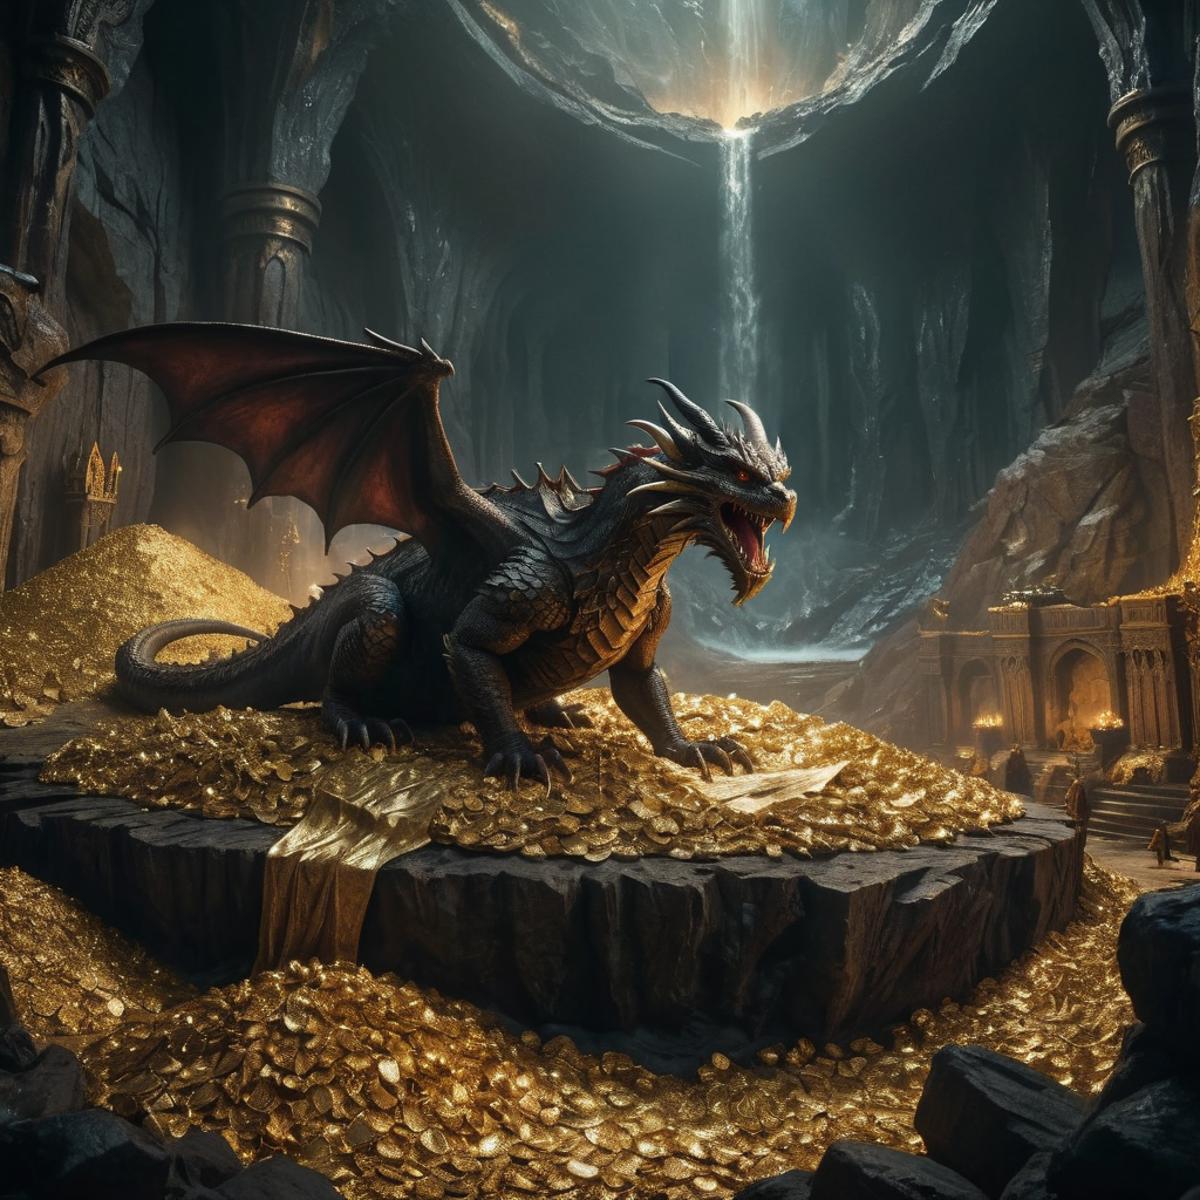 A dragon sitting on a pile of gold coins with a waterfall in the background.